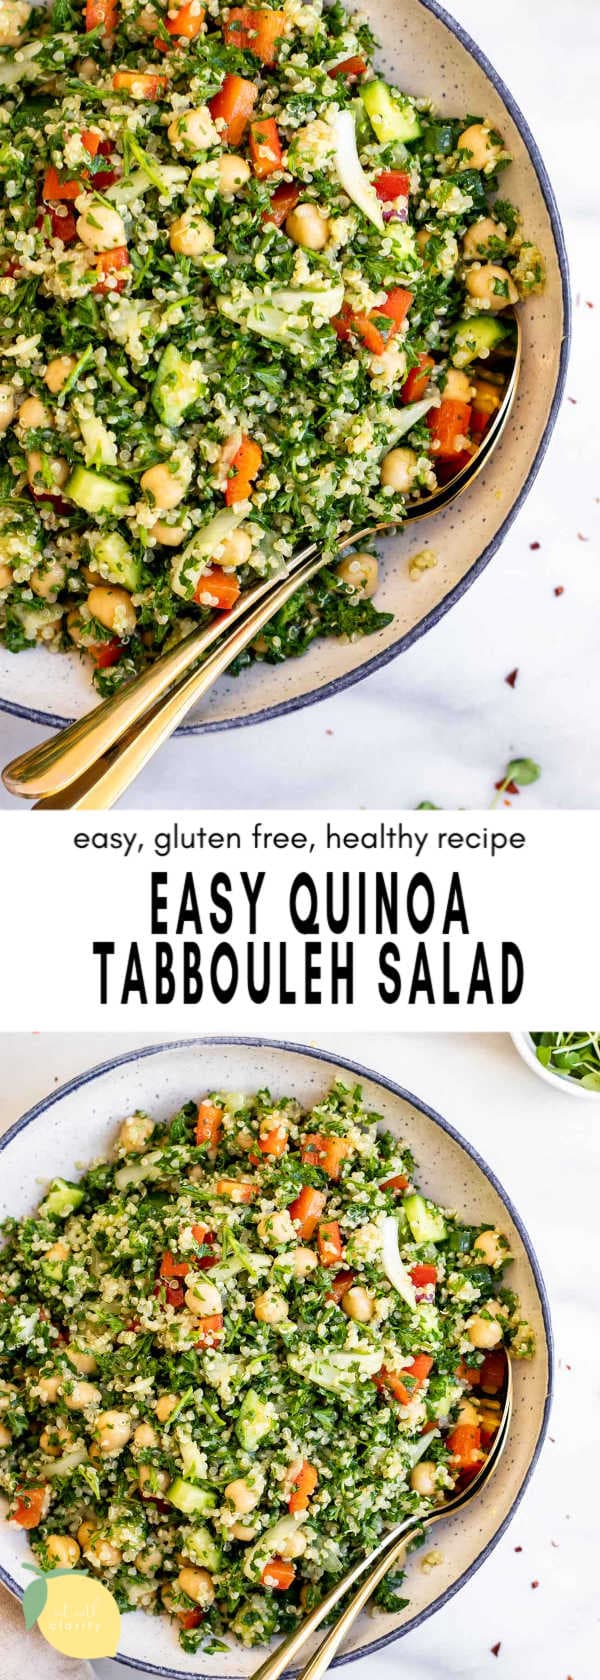 Easy Quinoa Tabbouleh Salad (Gluten Free) | Eat With Clarity